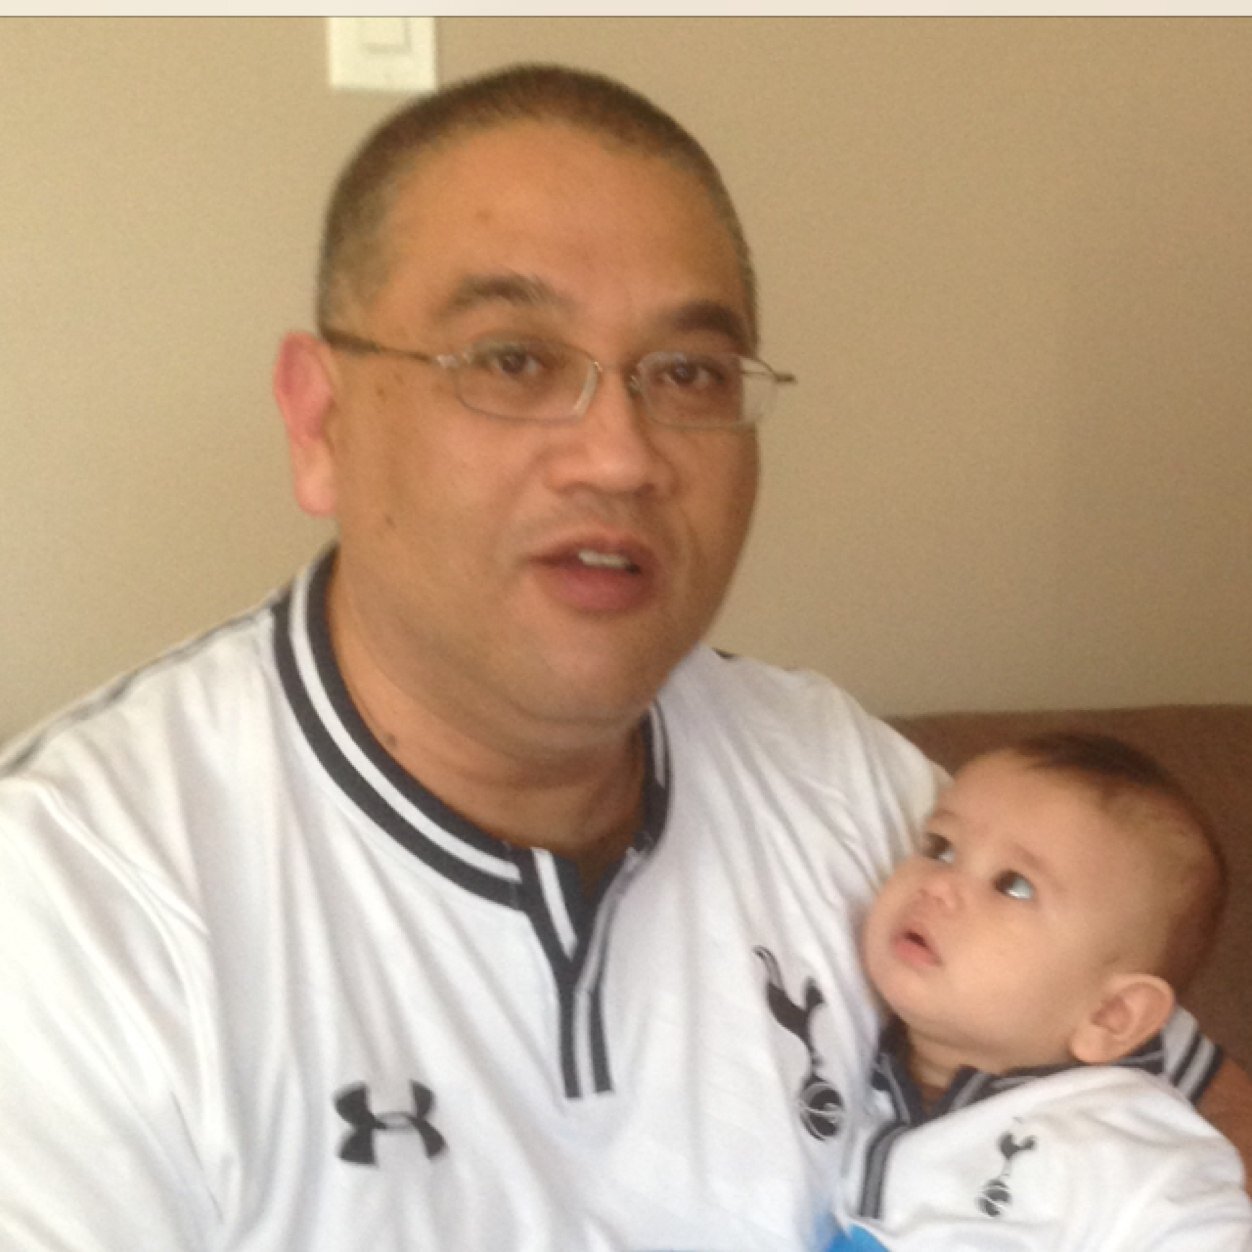 Husband, dad, businessman and poker enthusiast, who also loves Tottenham #COYS